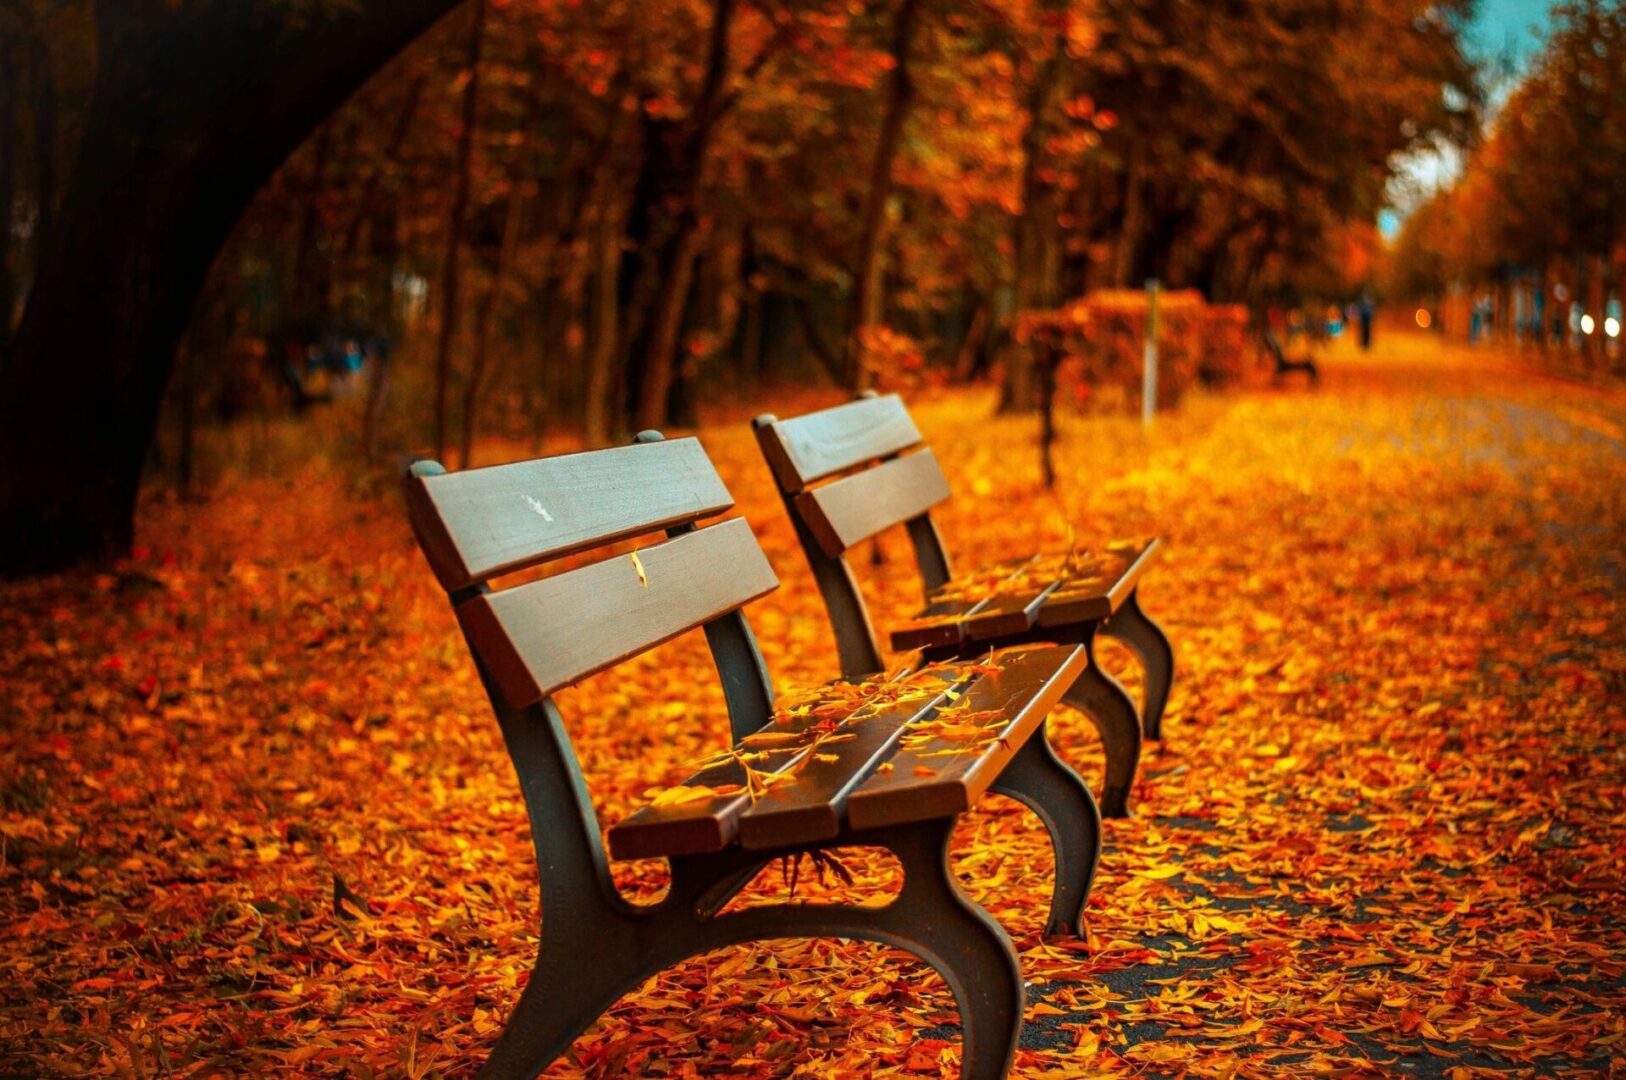 A bench is sitting in the middle of a park with autumn leaves.